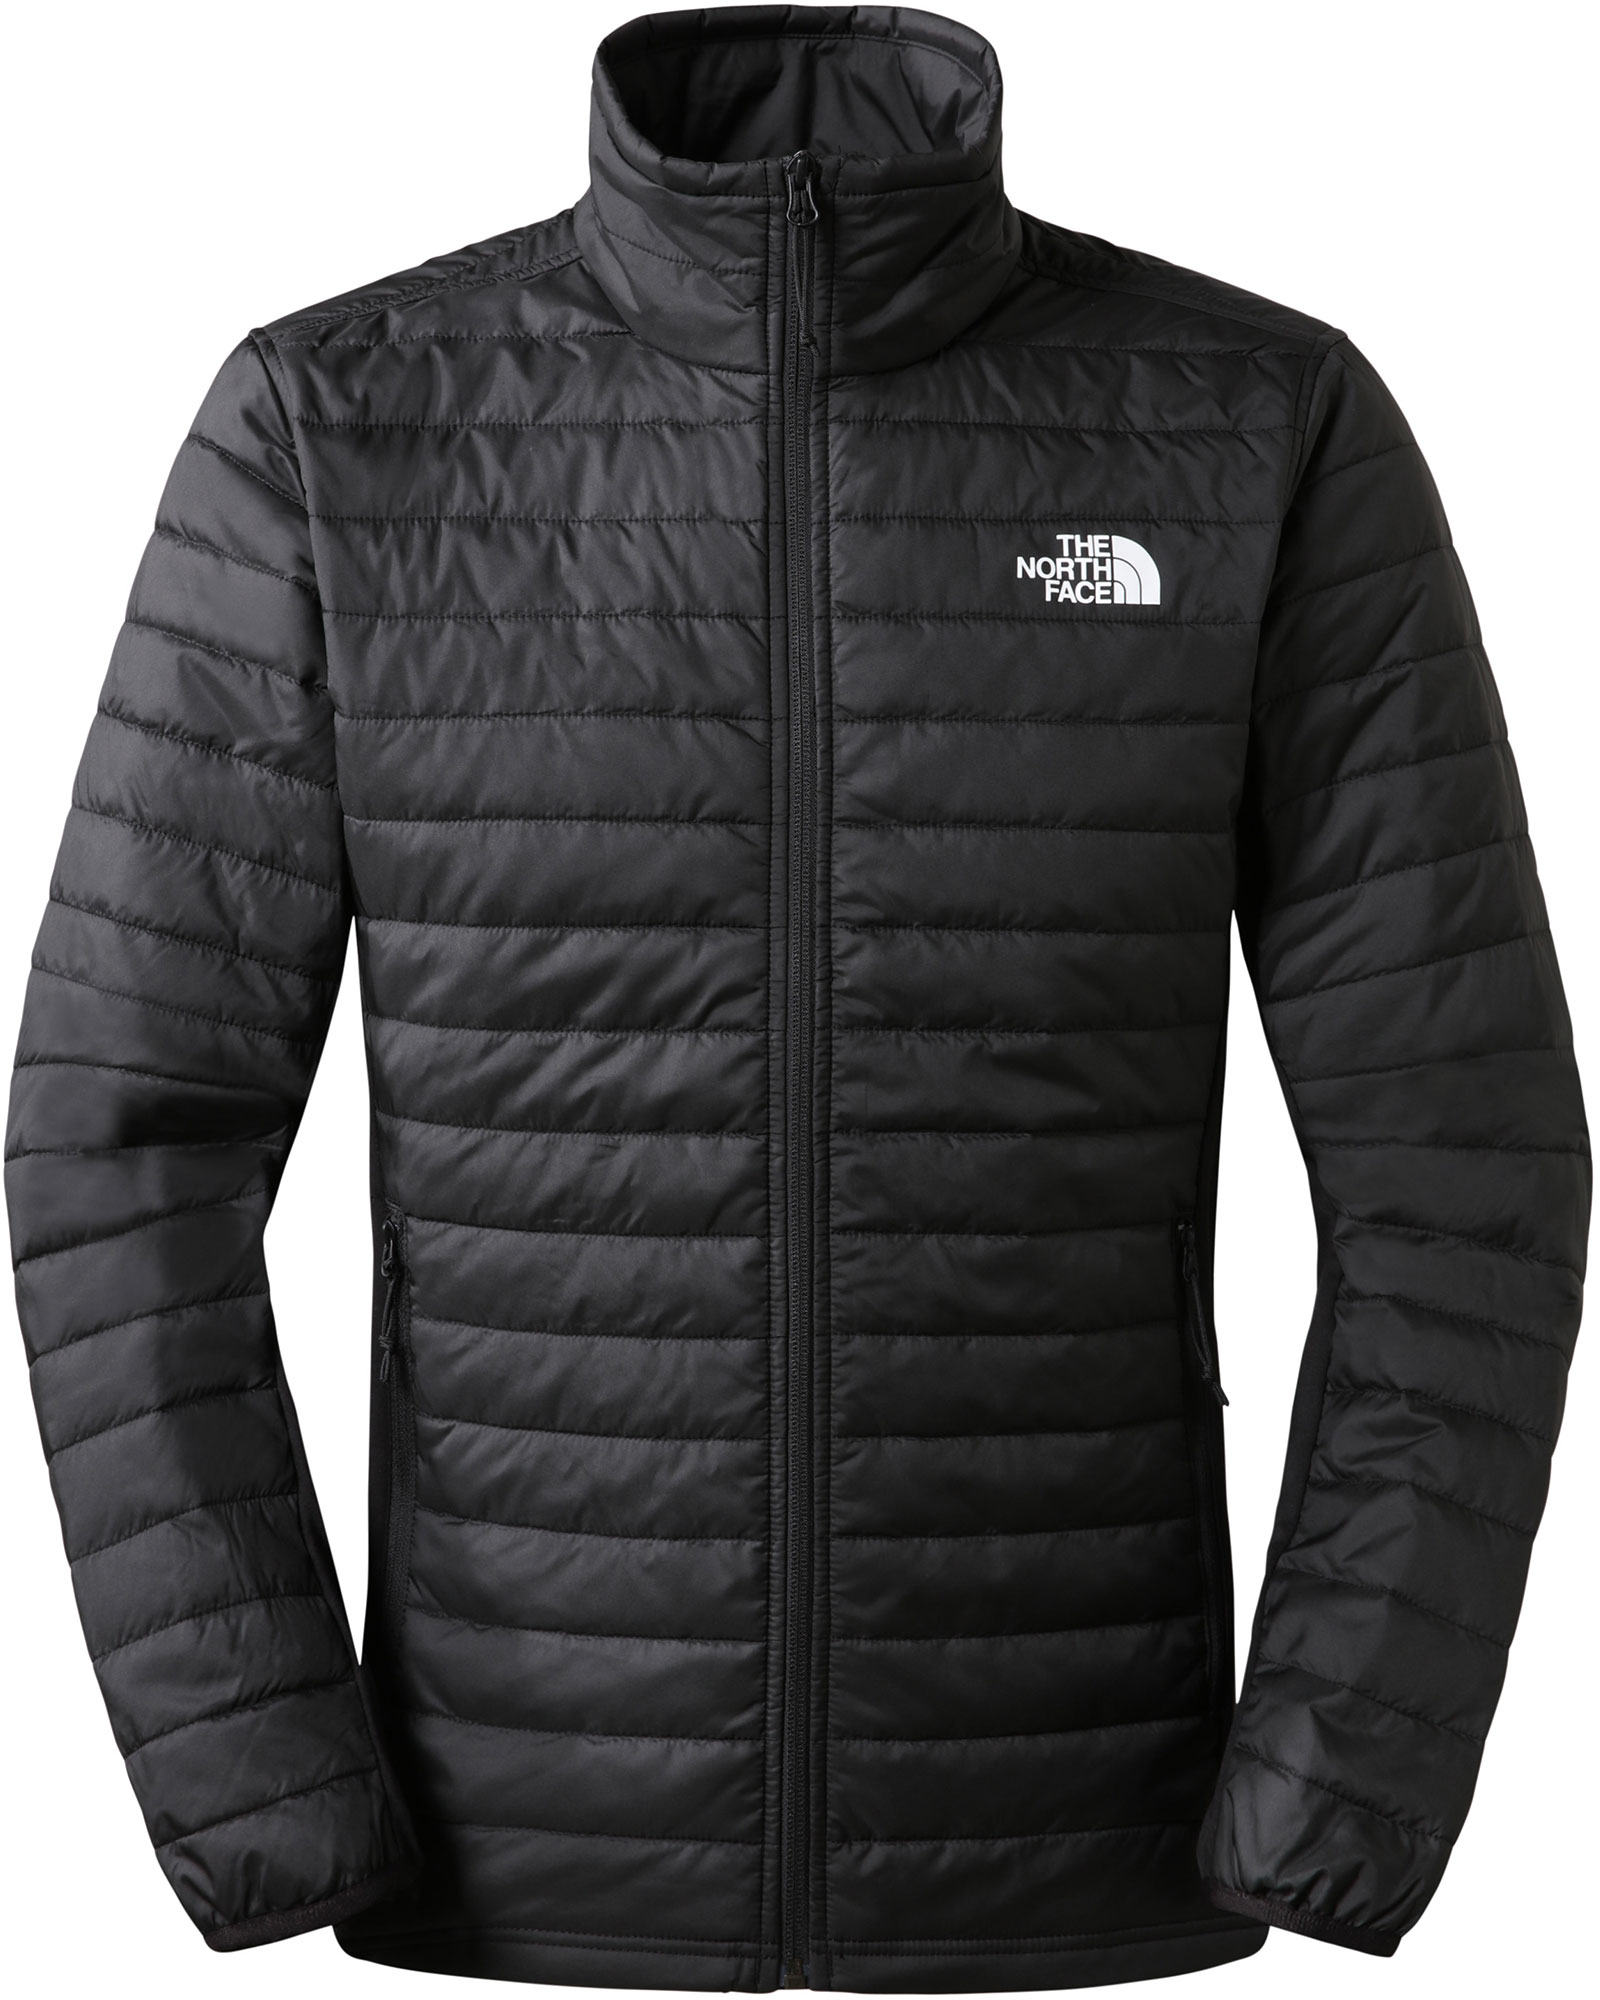 The North Face Canyonlands Hybrid Men’s Insulated Jacket - TNF Black S